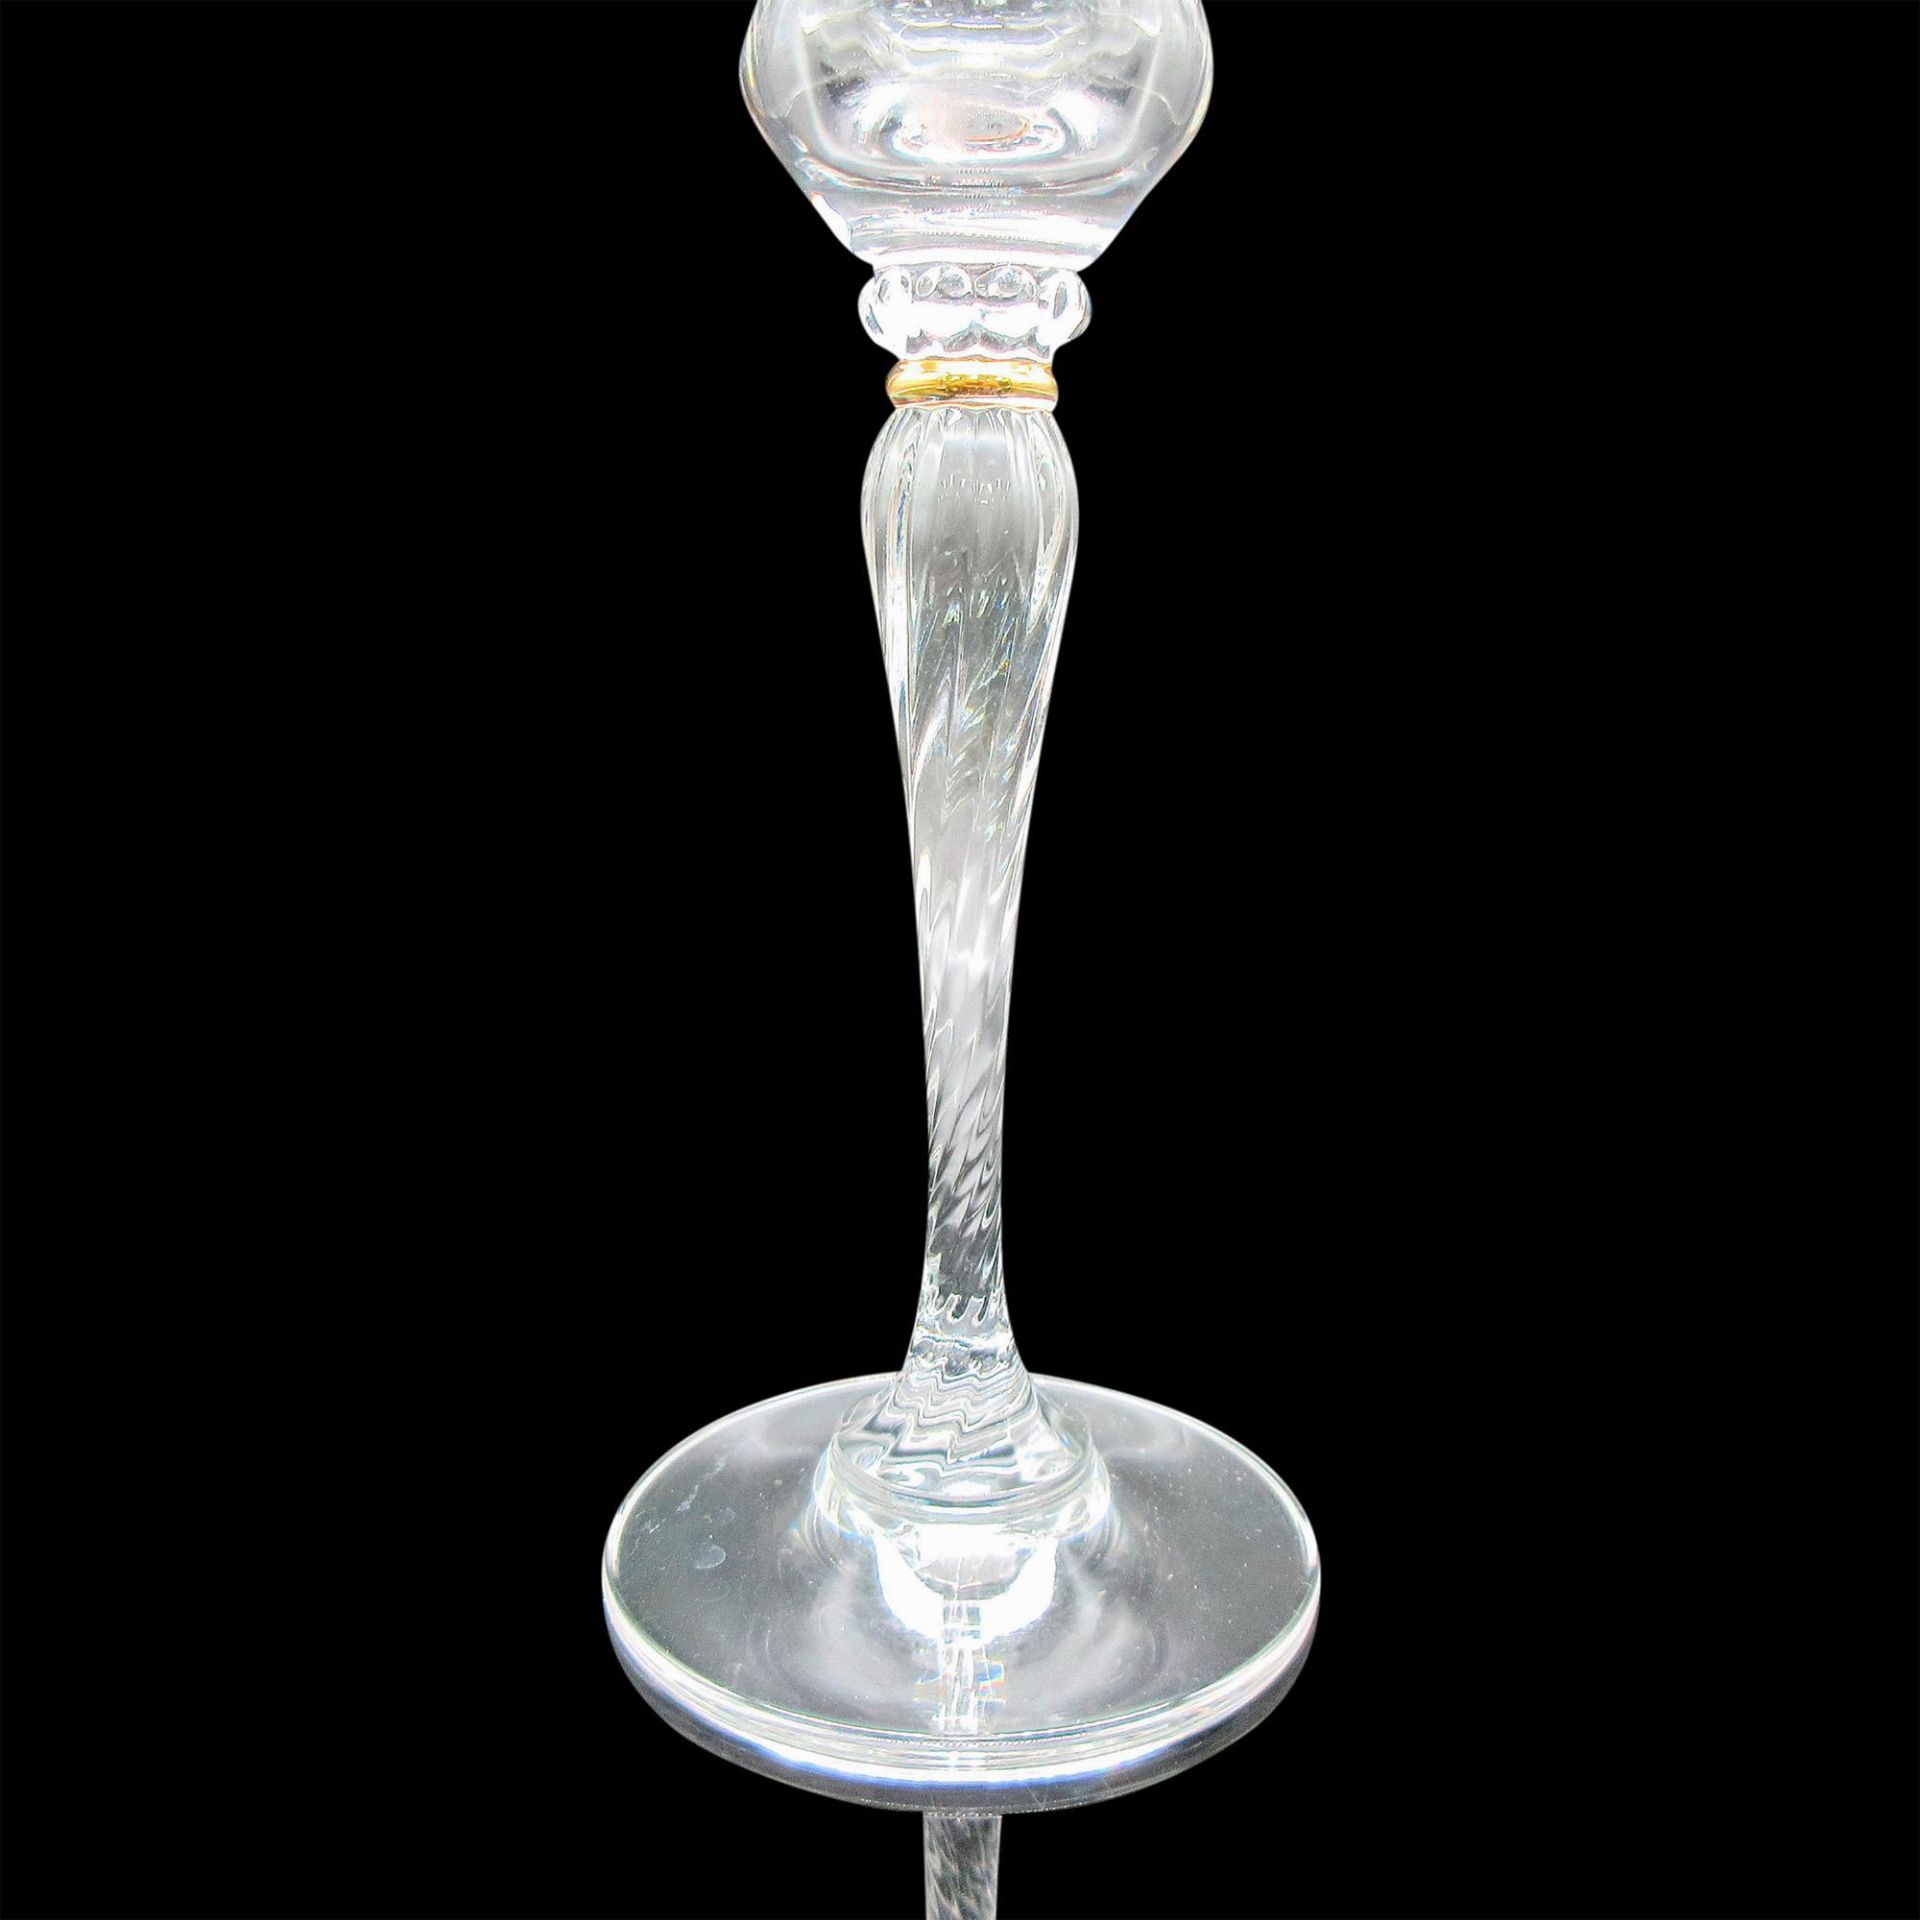 Mikasa Crystal Candle Holder - Image 2 of 3